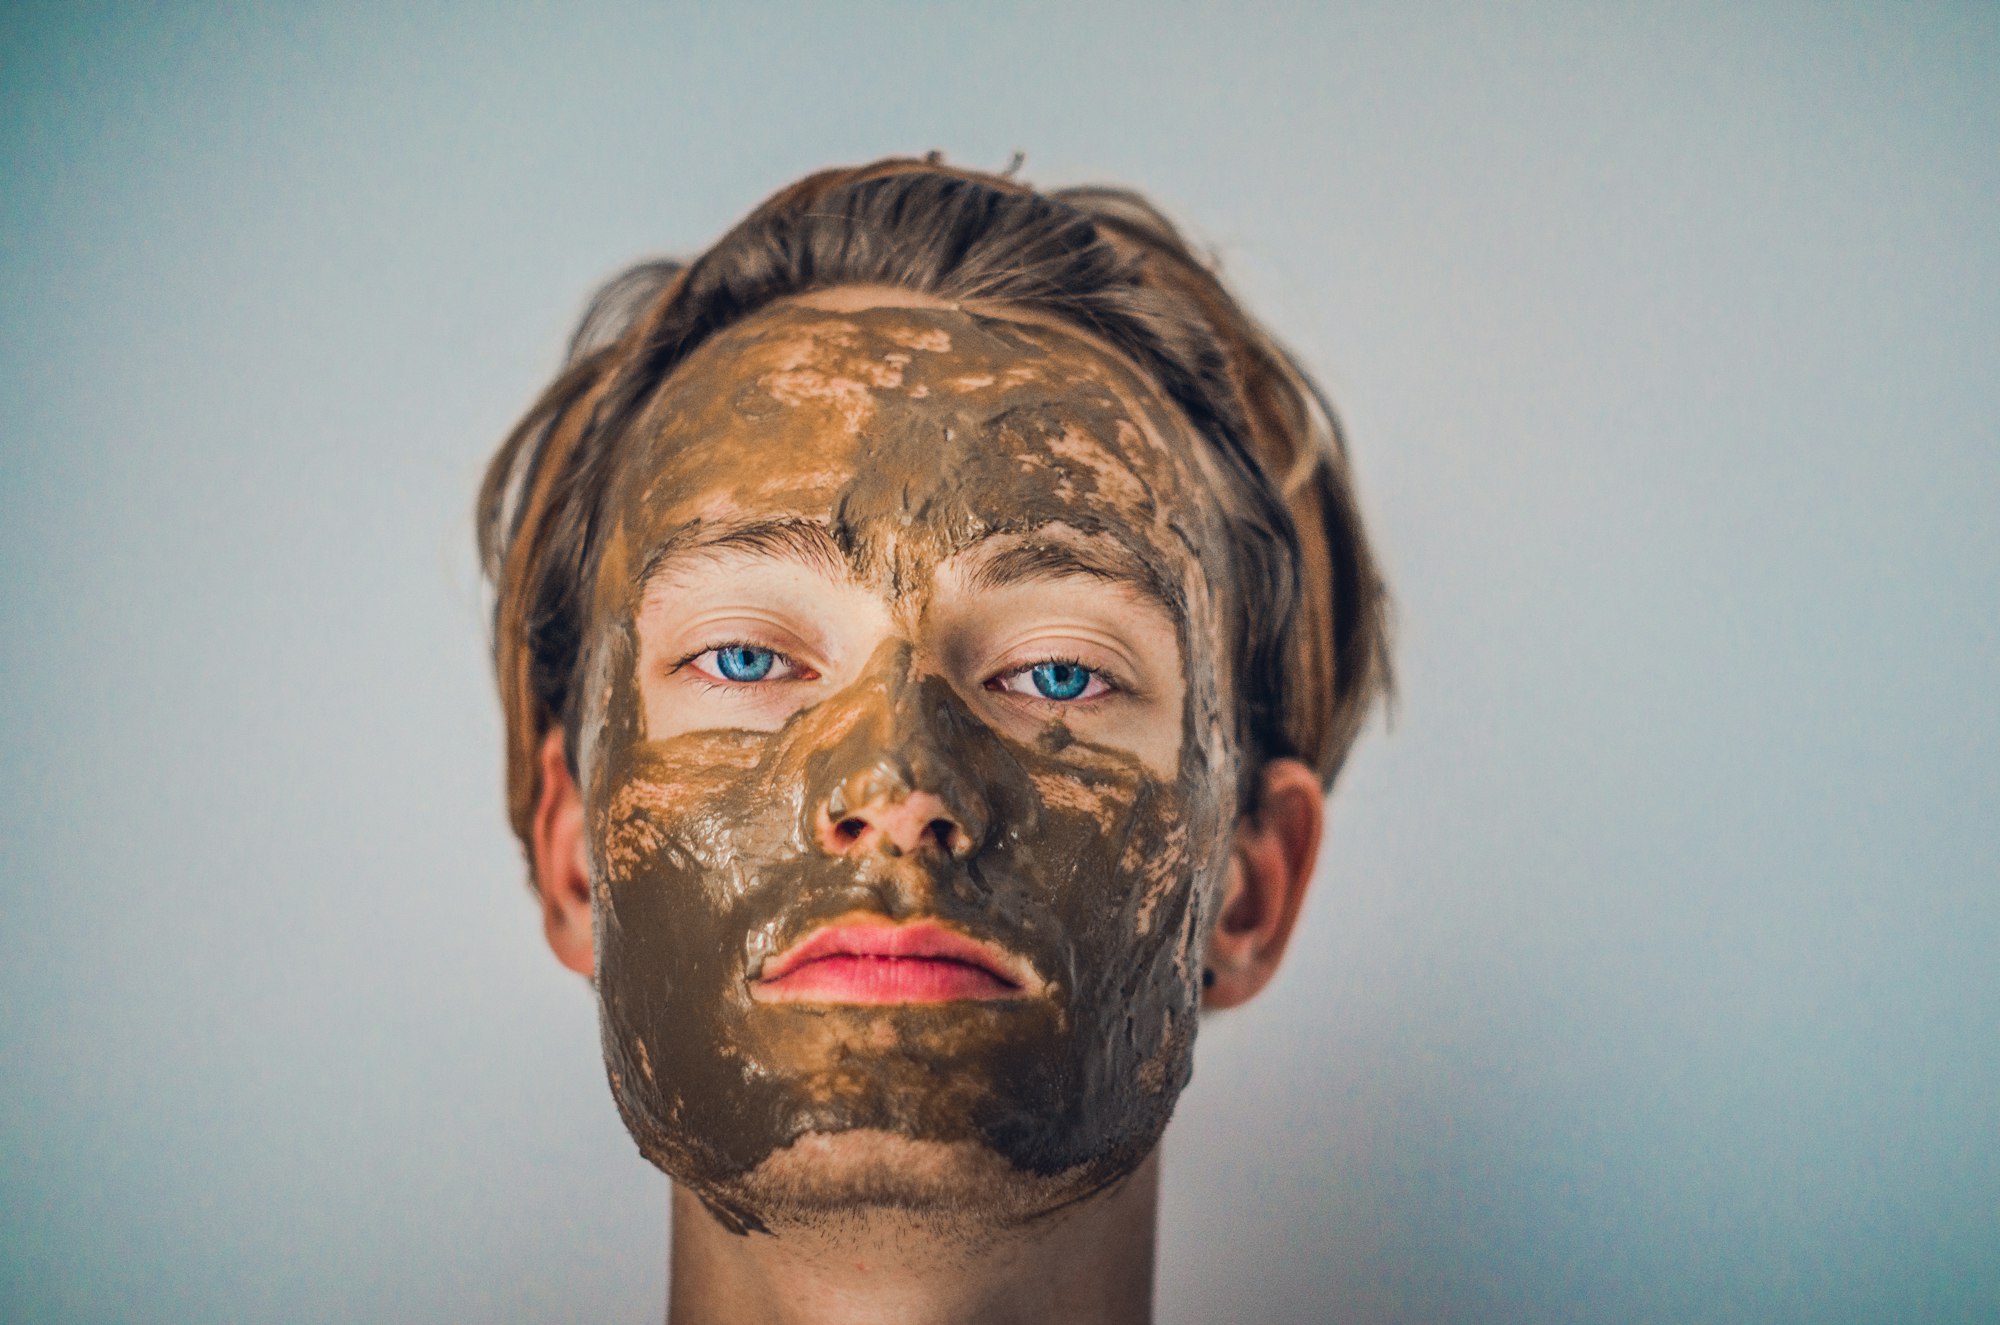 Man with a mud mask